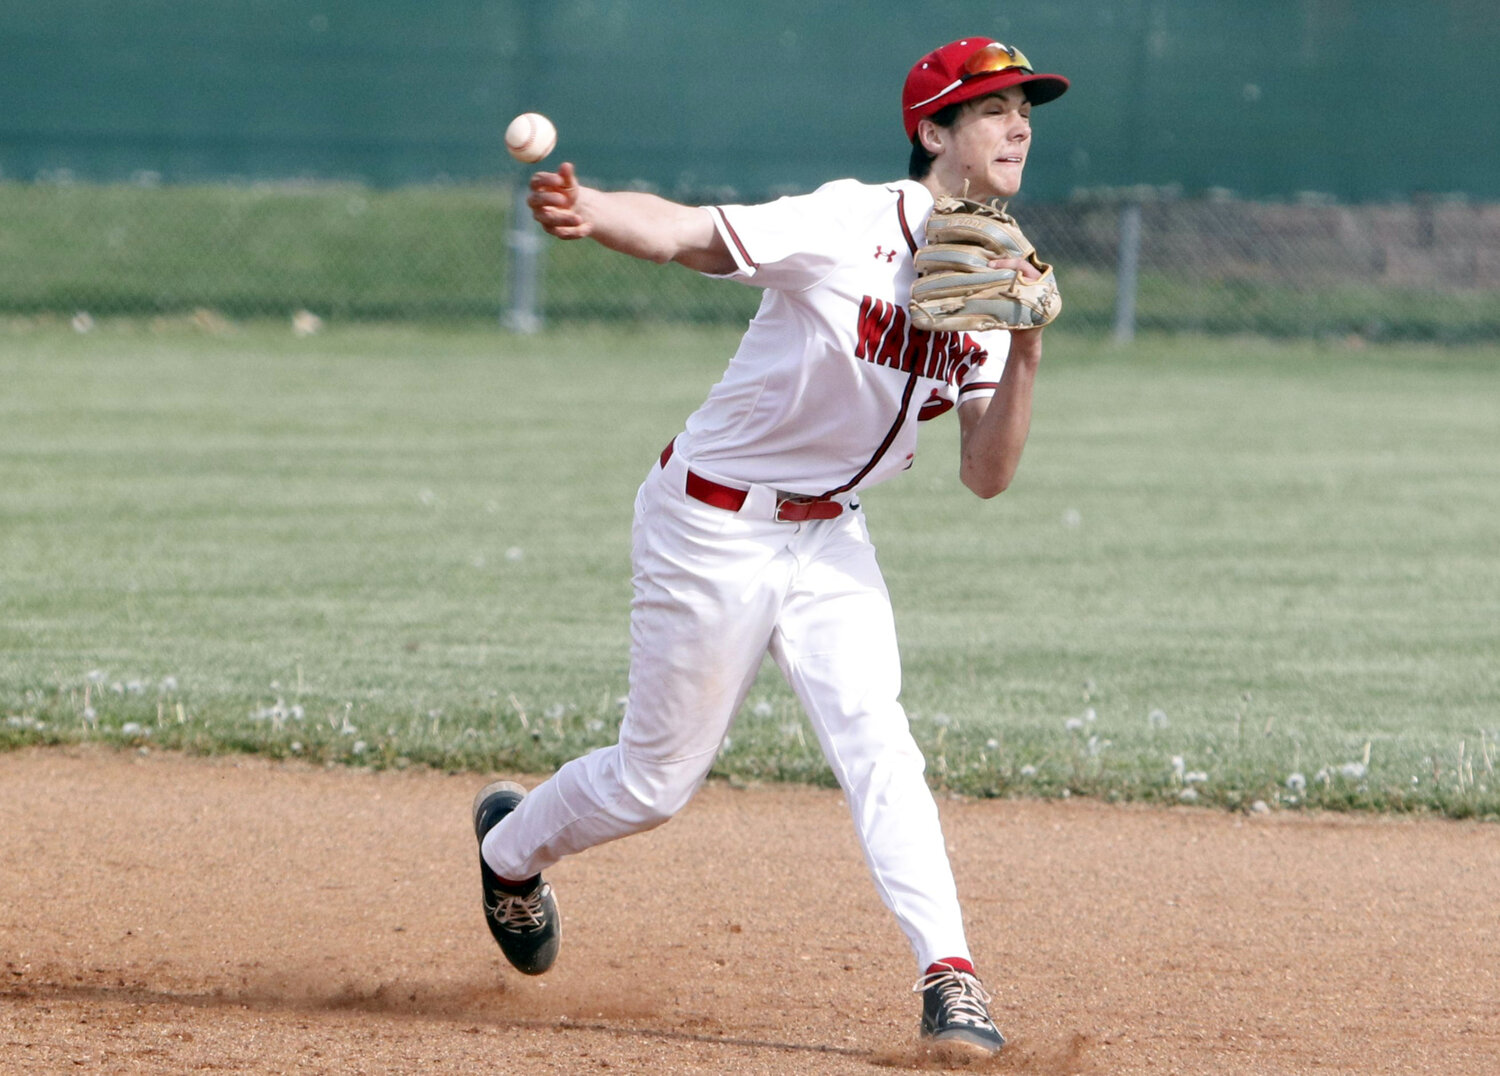 Colin Disilvister throws to first base to complete a double play during the first inning of Warrenton's loss to St. Charles West.